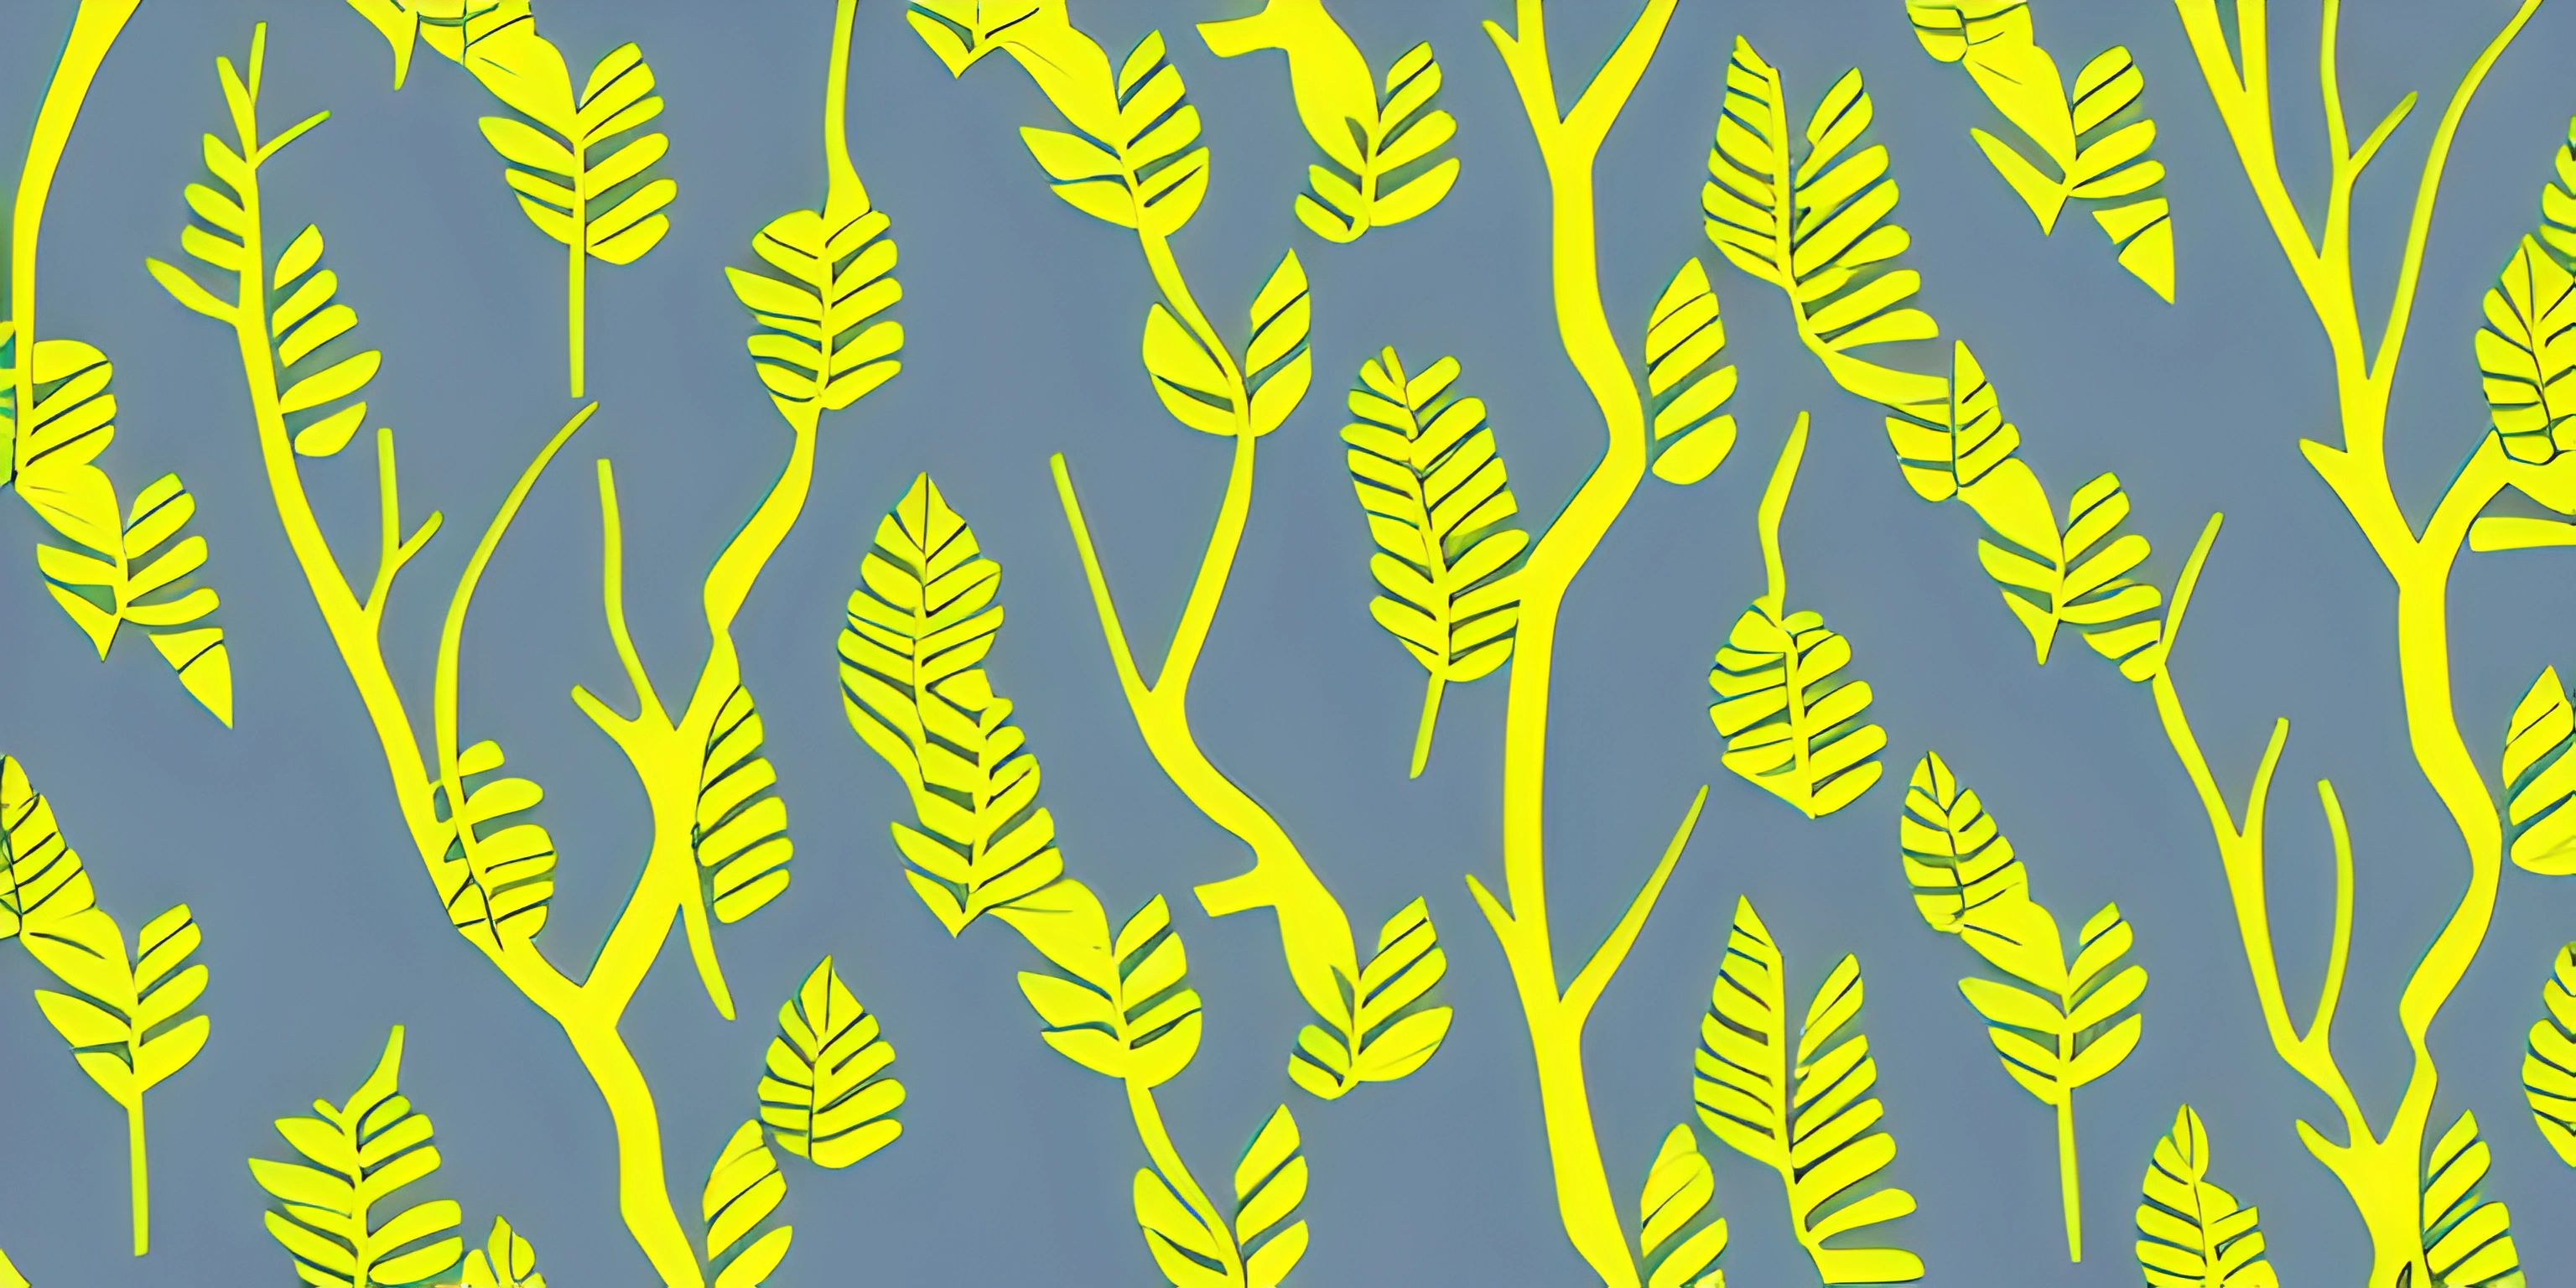 a wallpaper with trees and a birds in flight in yellow and blue, on a dark blue background